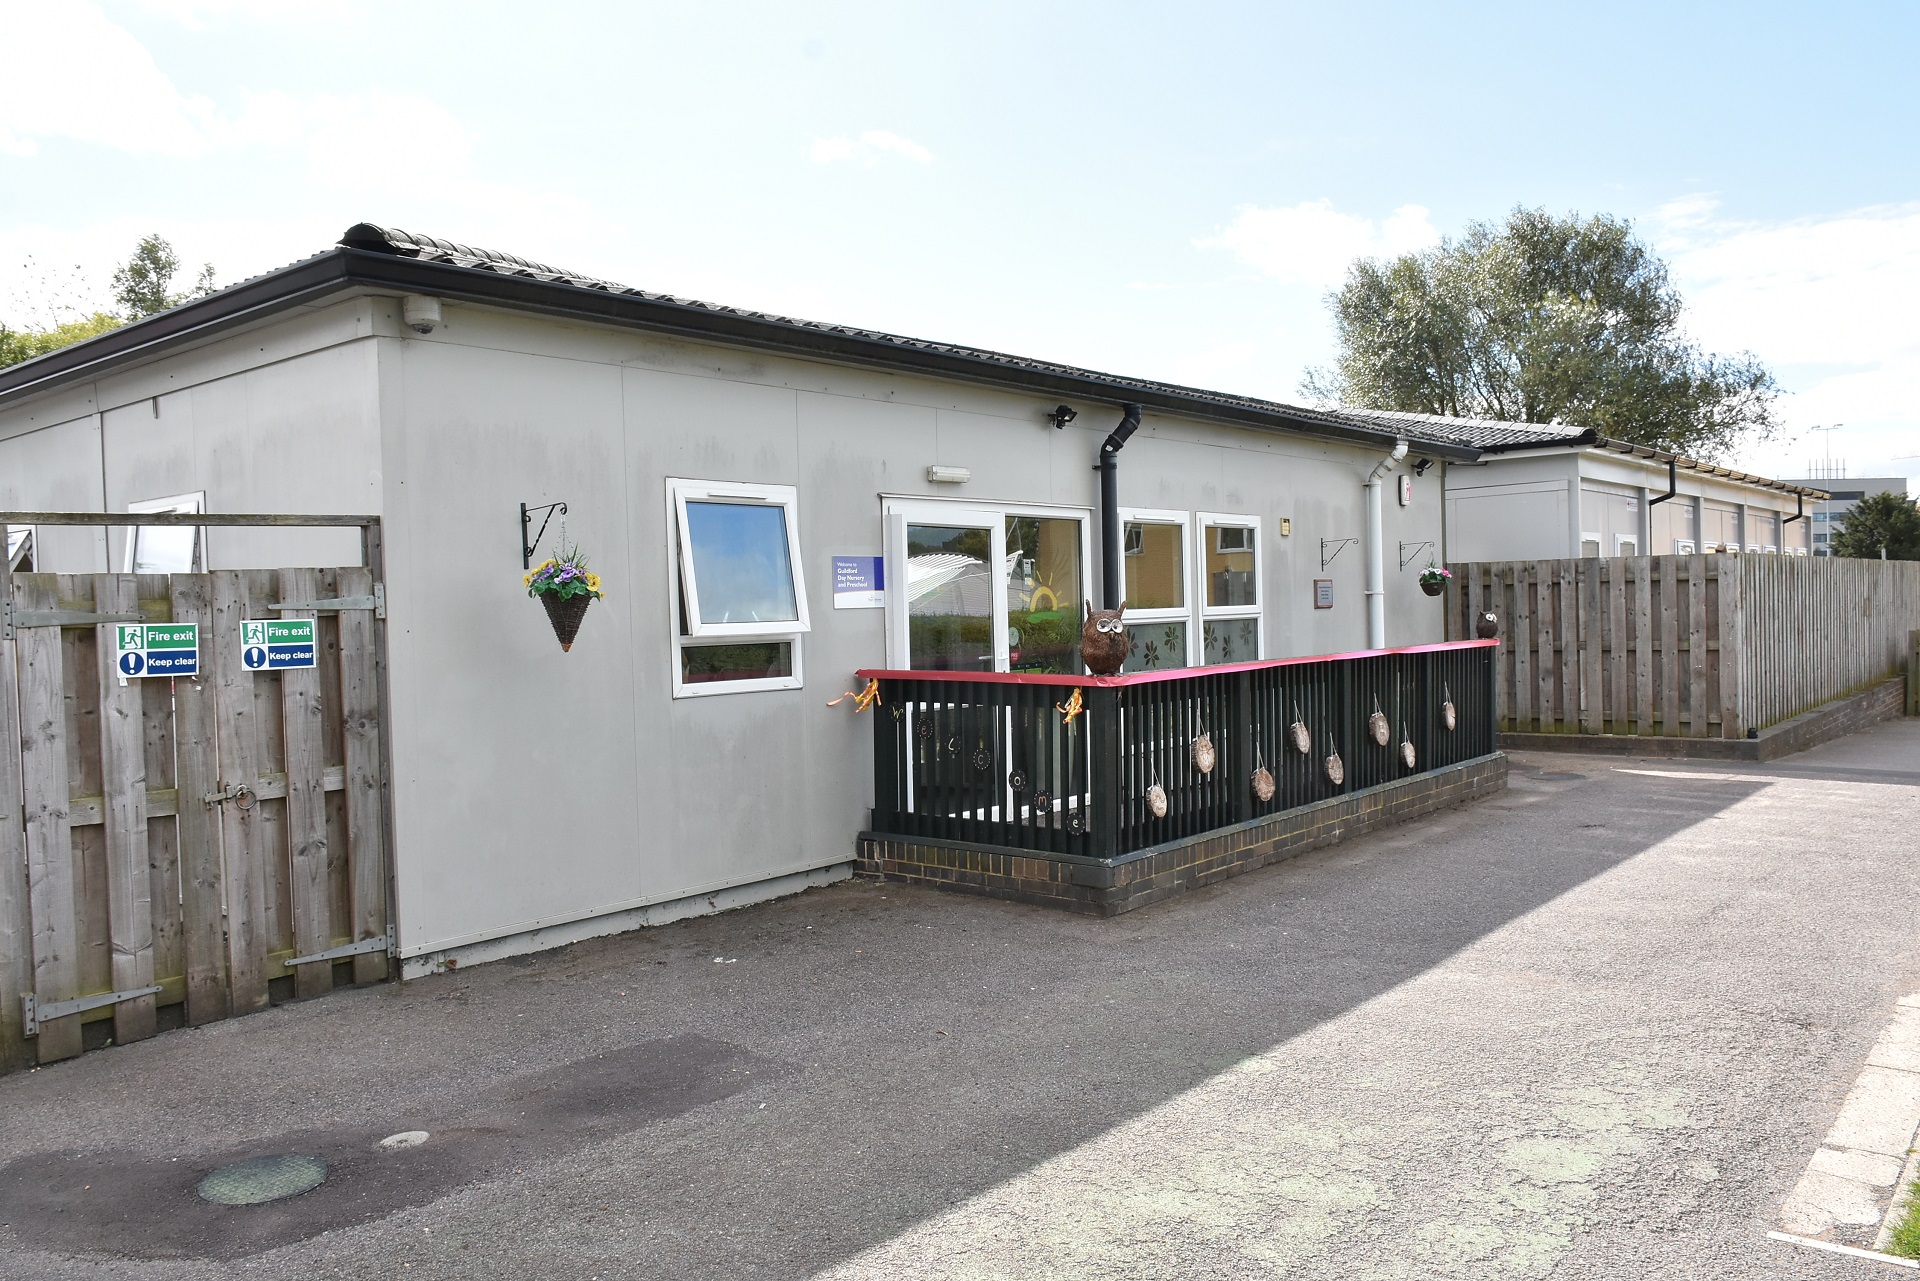 Bright Horizons Guildford Day Nursery and Preschool external